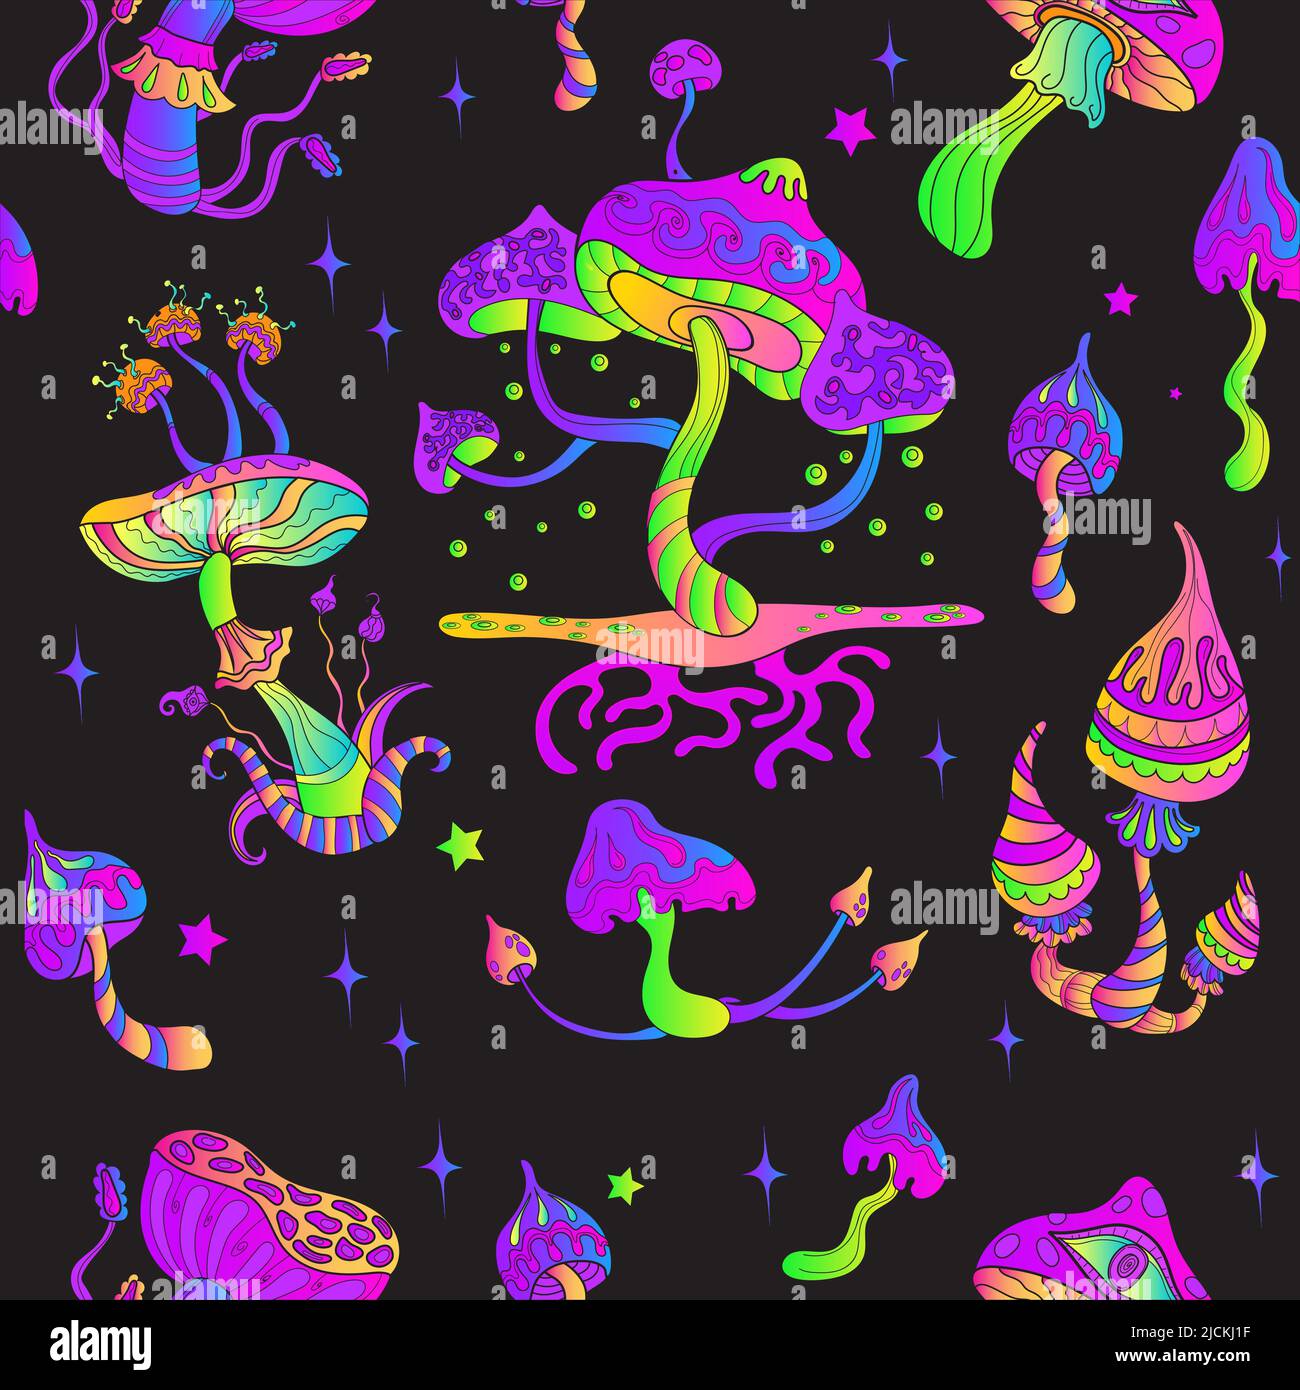 Mushroom Trippy Images | Free Photos, PNG Stickers, Wallpapers & Backgrounds  - rawpixel